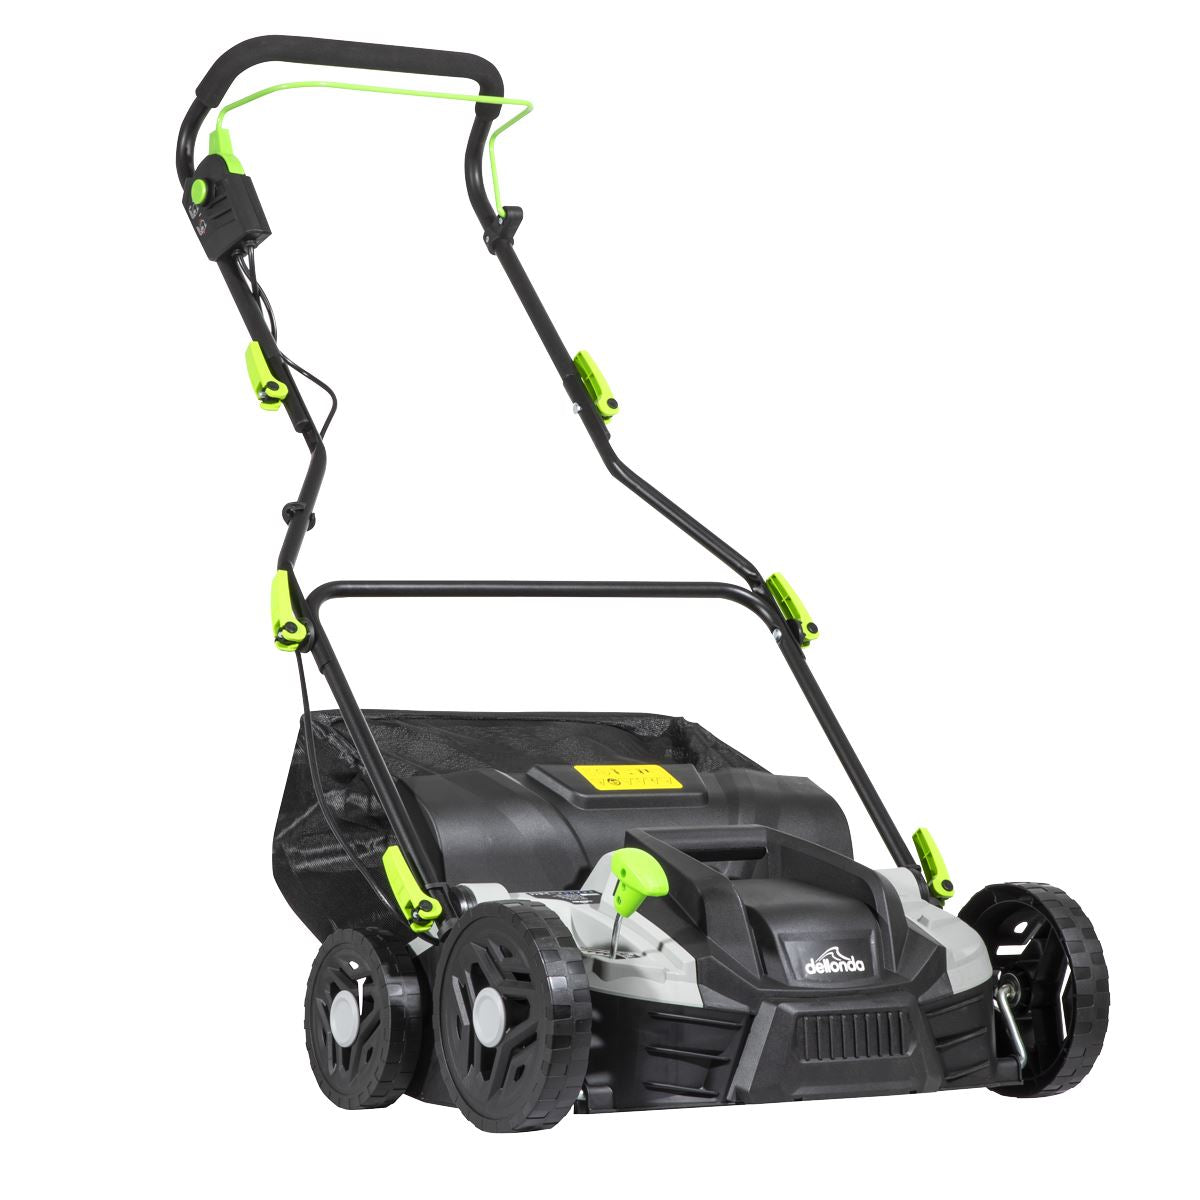 Dellonda 1500W Electric 2-in-1 Scarifier with 5-Heights, 36cm Cutting Diameter, 45L Grass Collection Bag, 10m Mains Cable, Hand Push